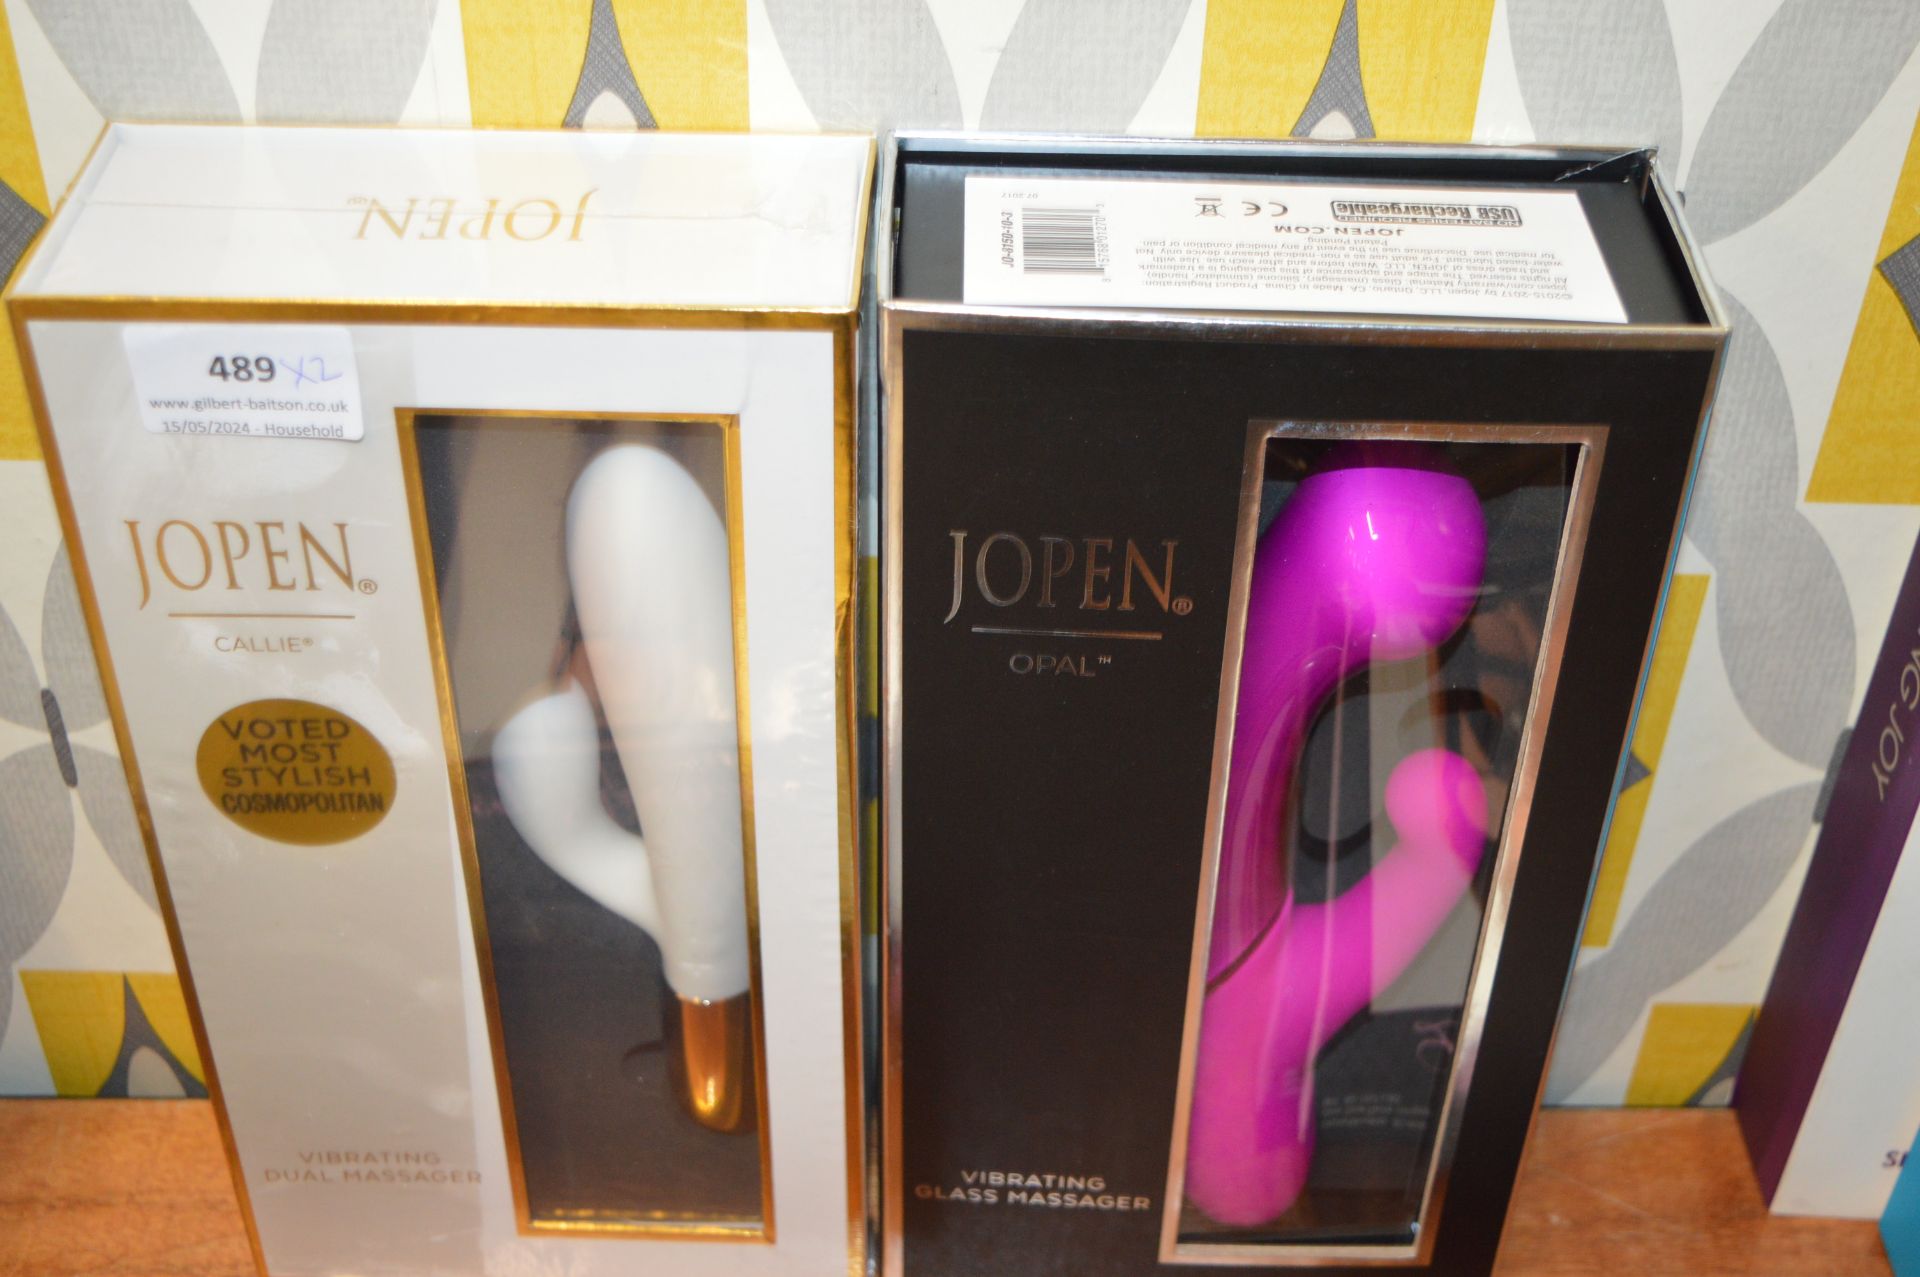 Two Jopen Personal Massagers (0ver 18's only)